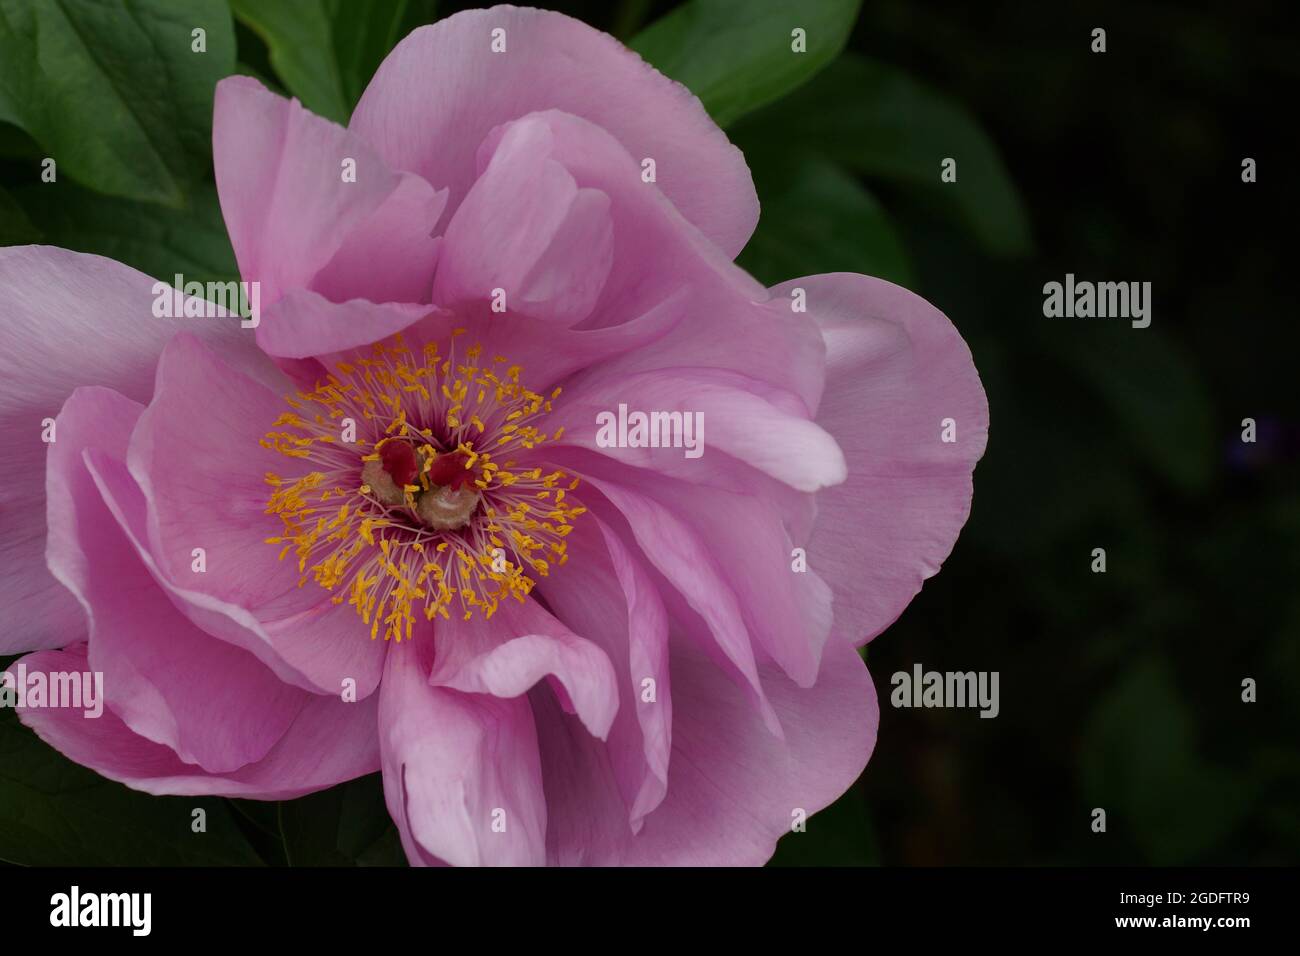 Paeonia May Lilac. Pink peony flower. Beautiful flower close-up. Stock Photo